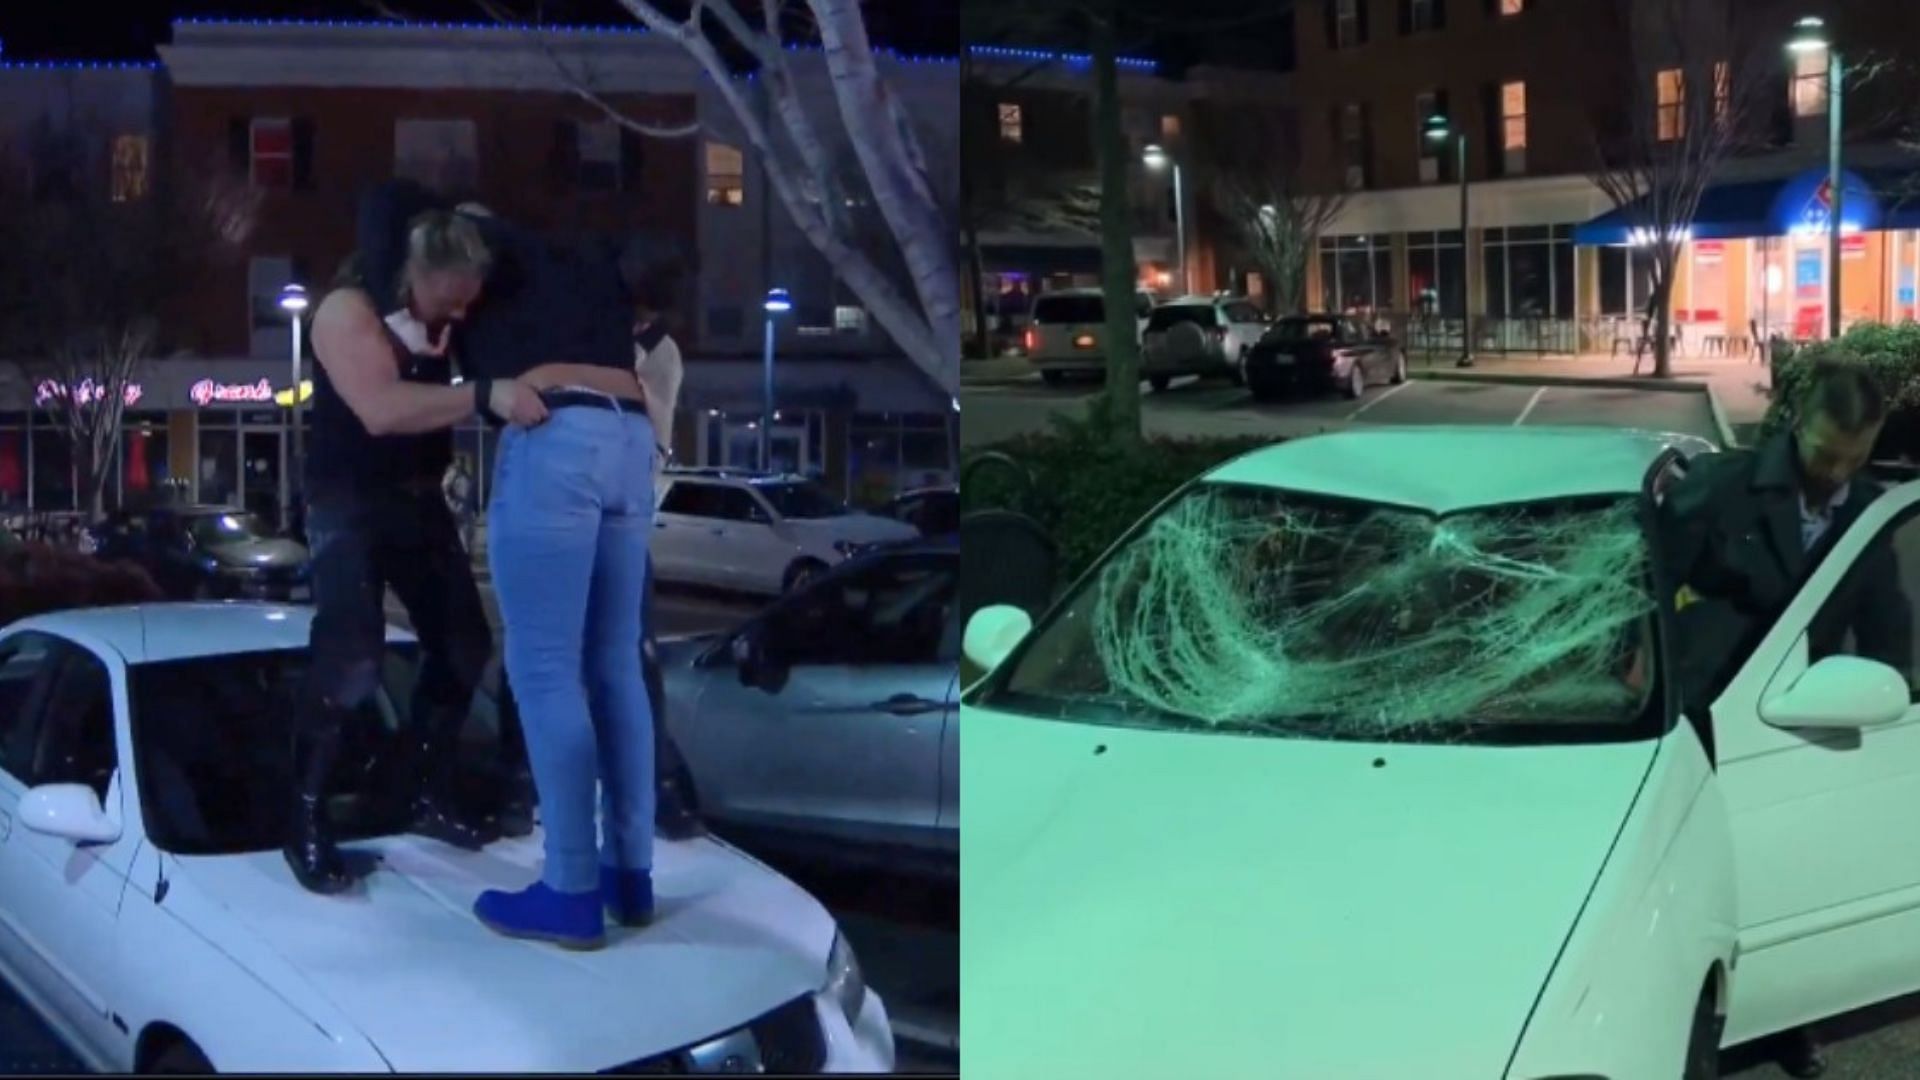 Former champion reacts to his car getting wrecked during AEW show